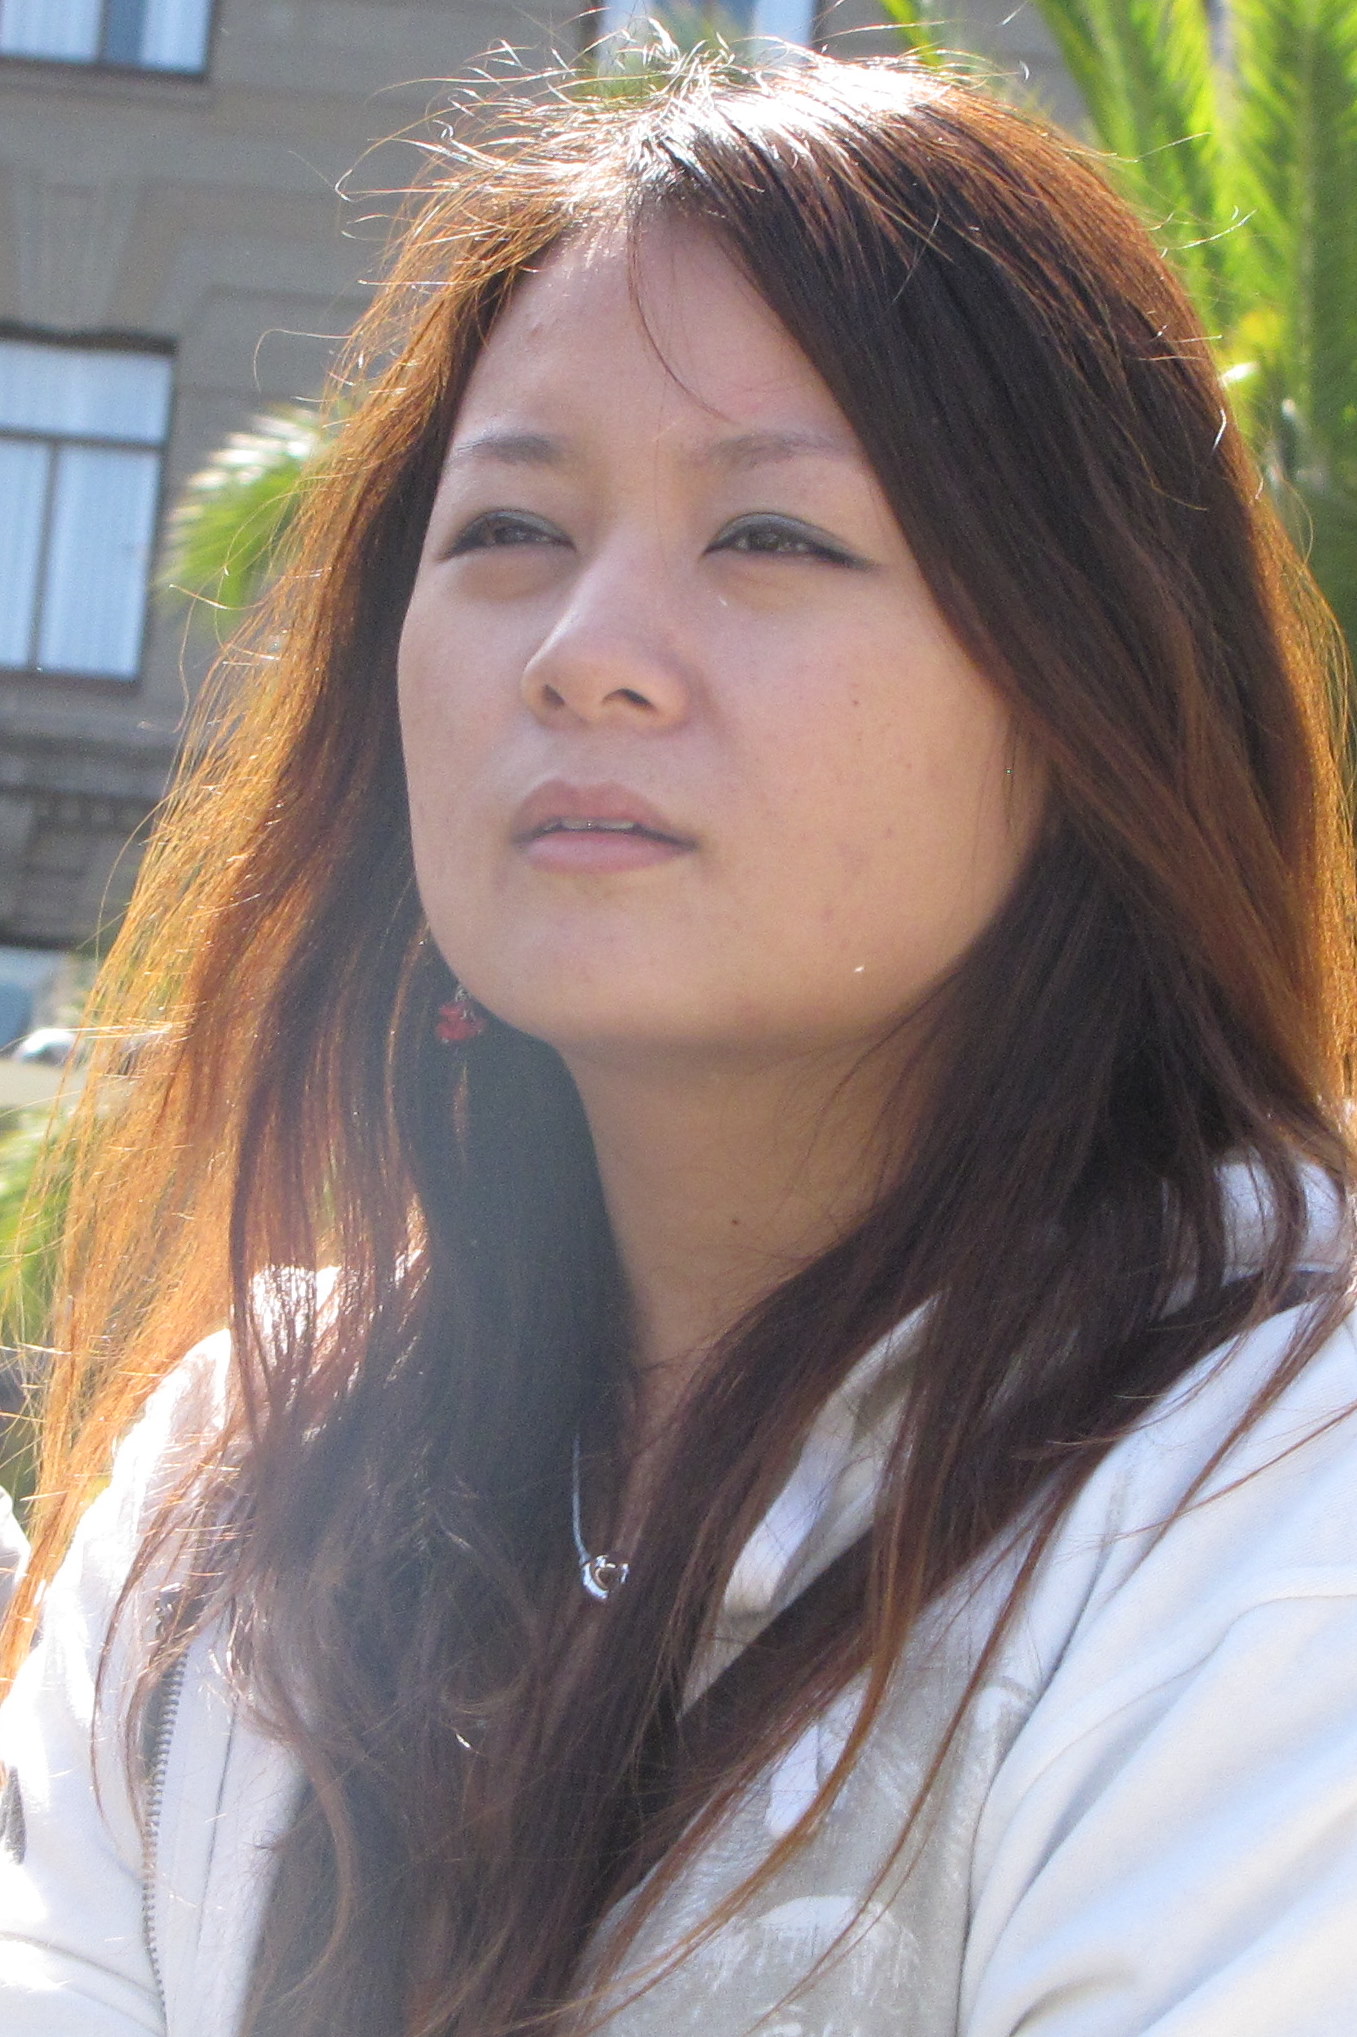 an asian woman wearing a white shirt and earrings looking into the distance